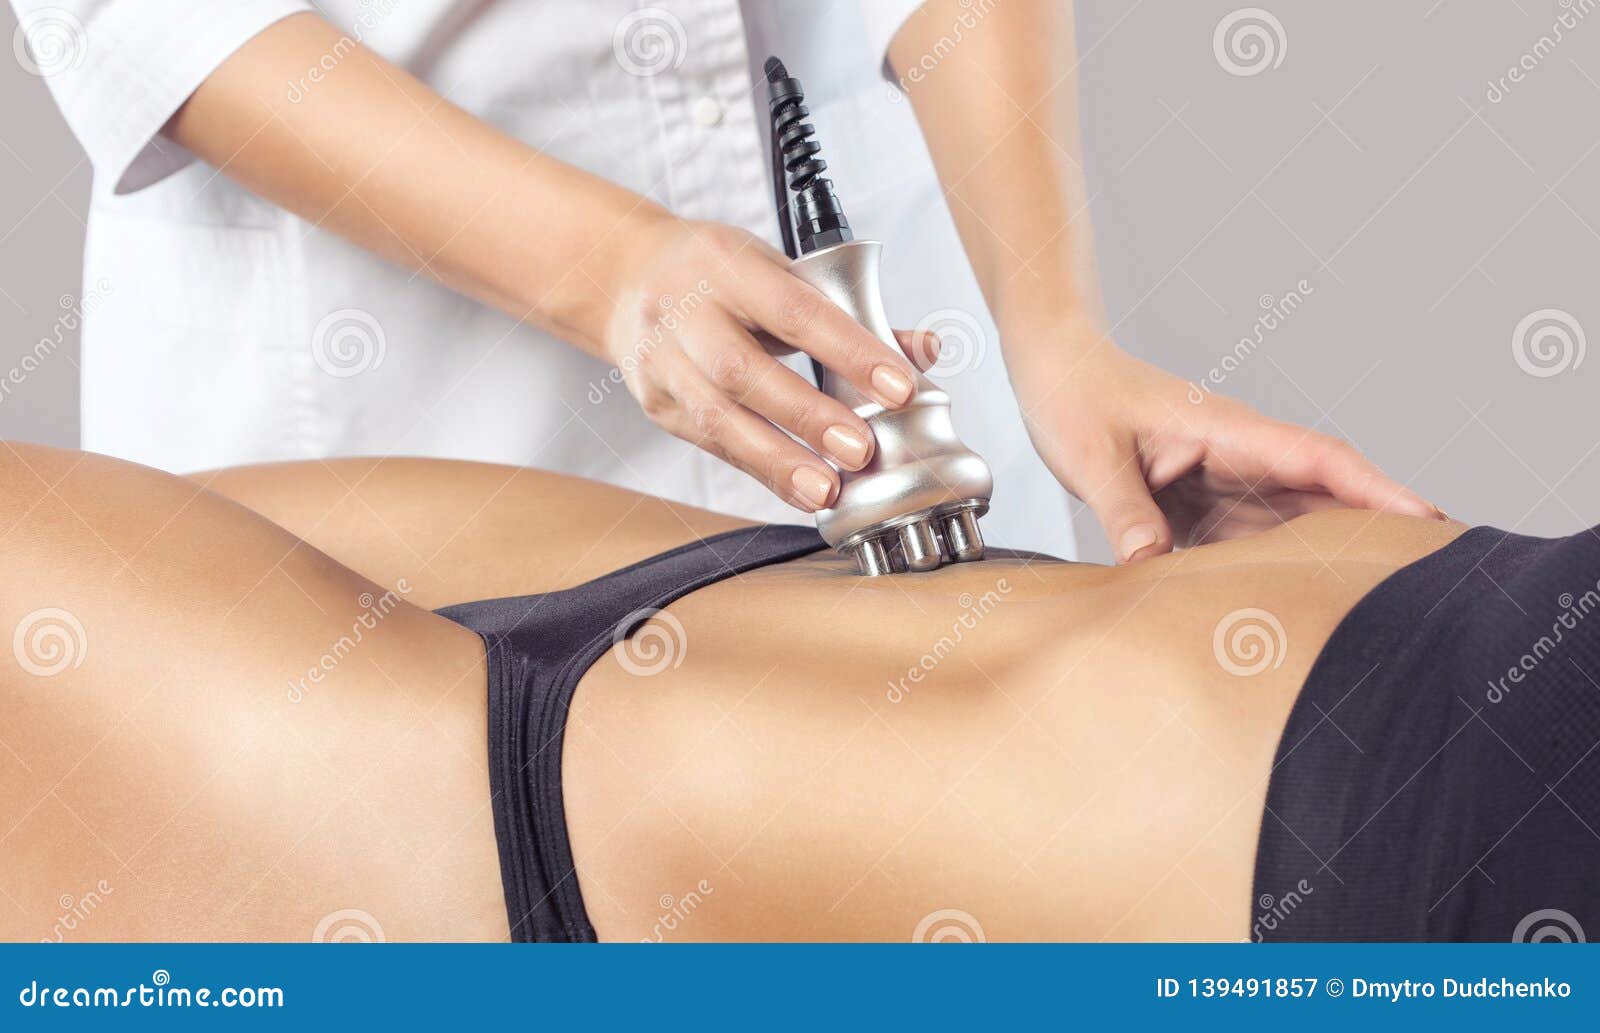 the doctor does the rf lifting procedure on the stomach and hips of a woman in a beauty parlor.